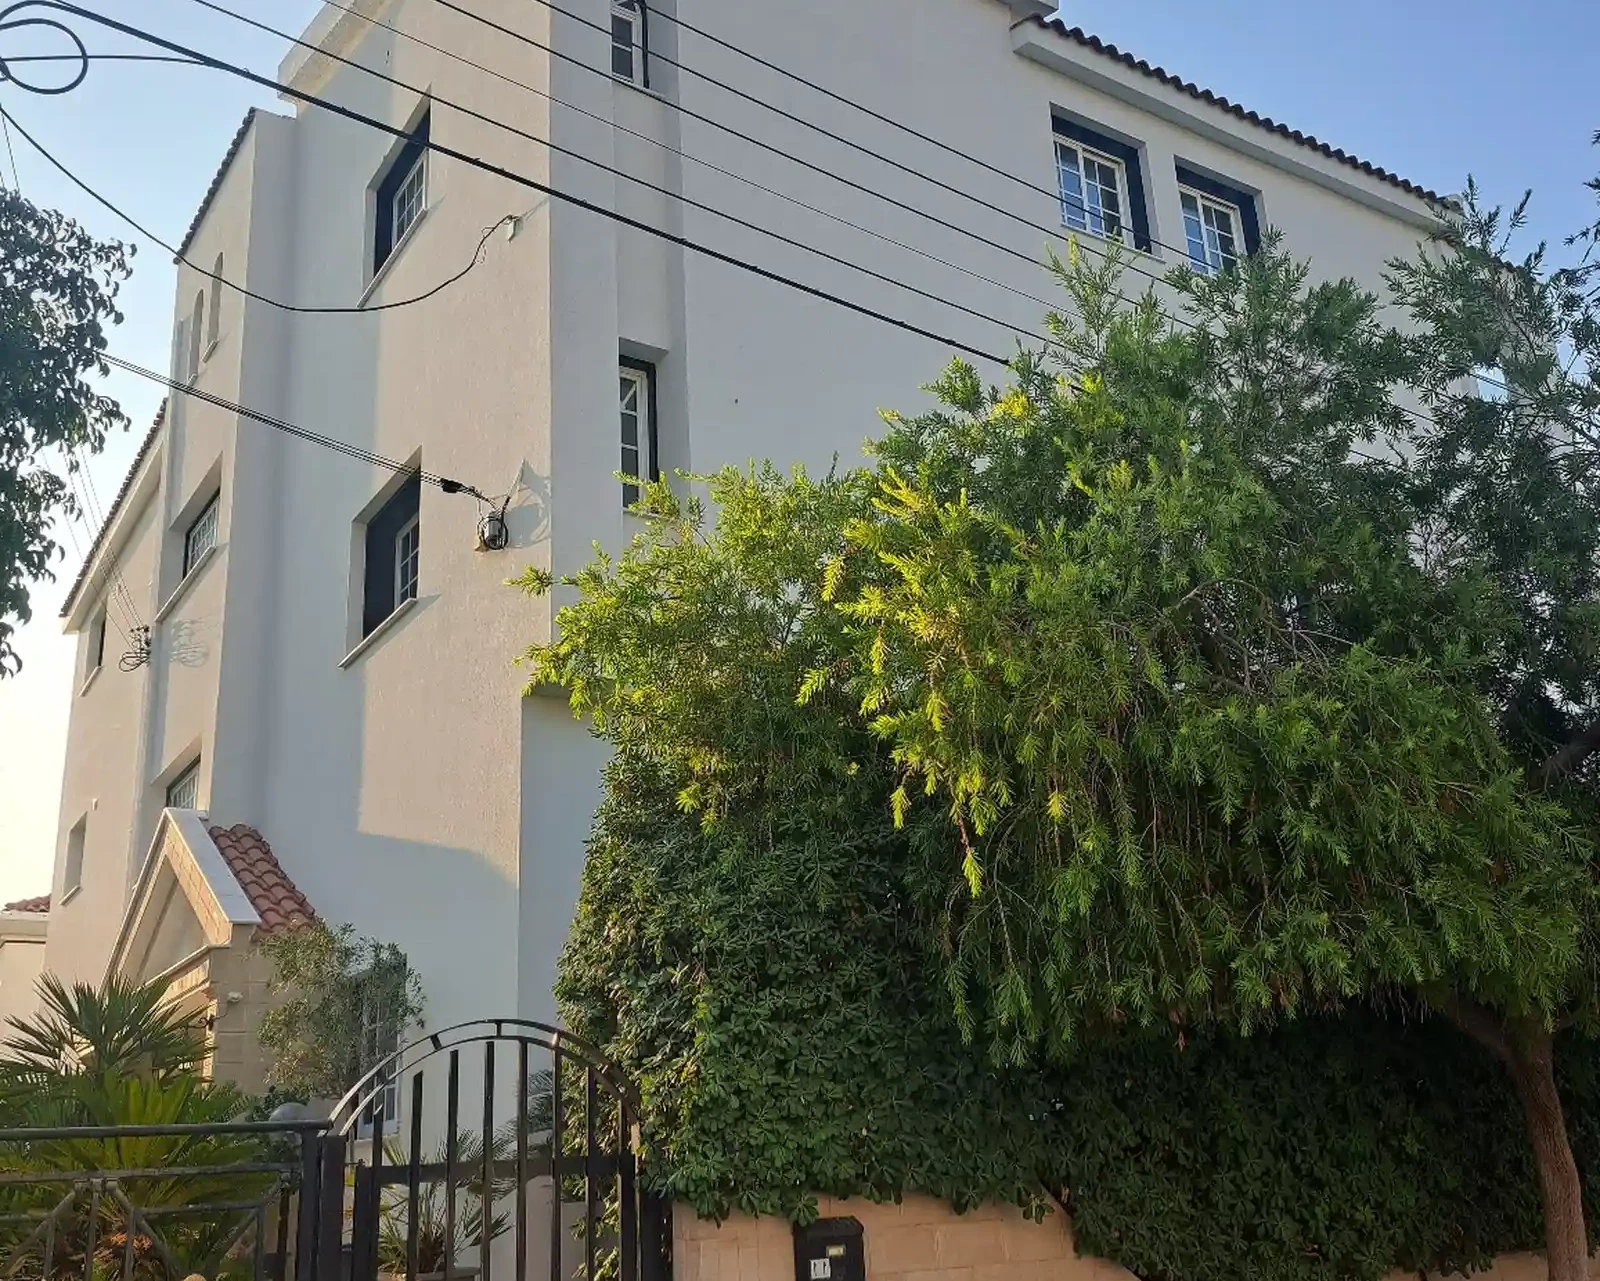 3-bedroom apartment to rent €1.500, image 1